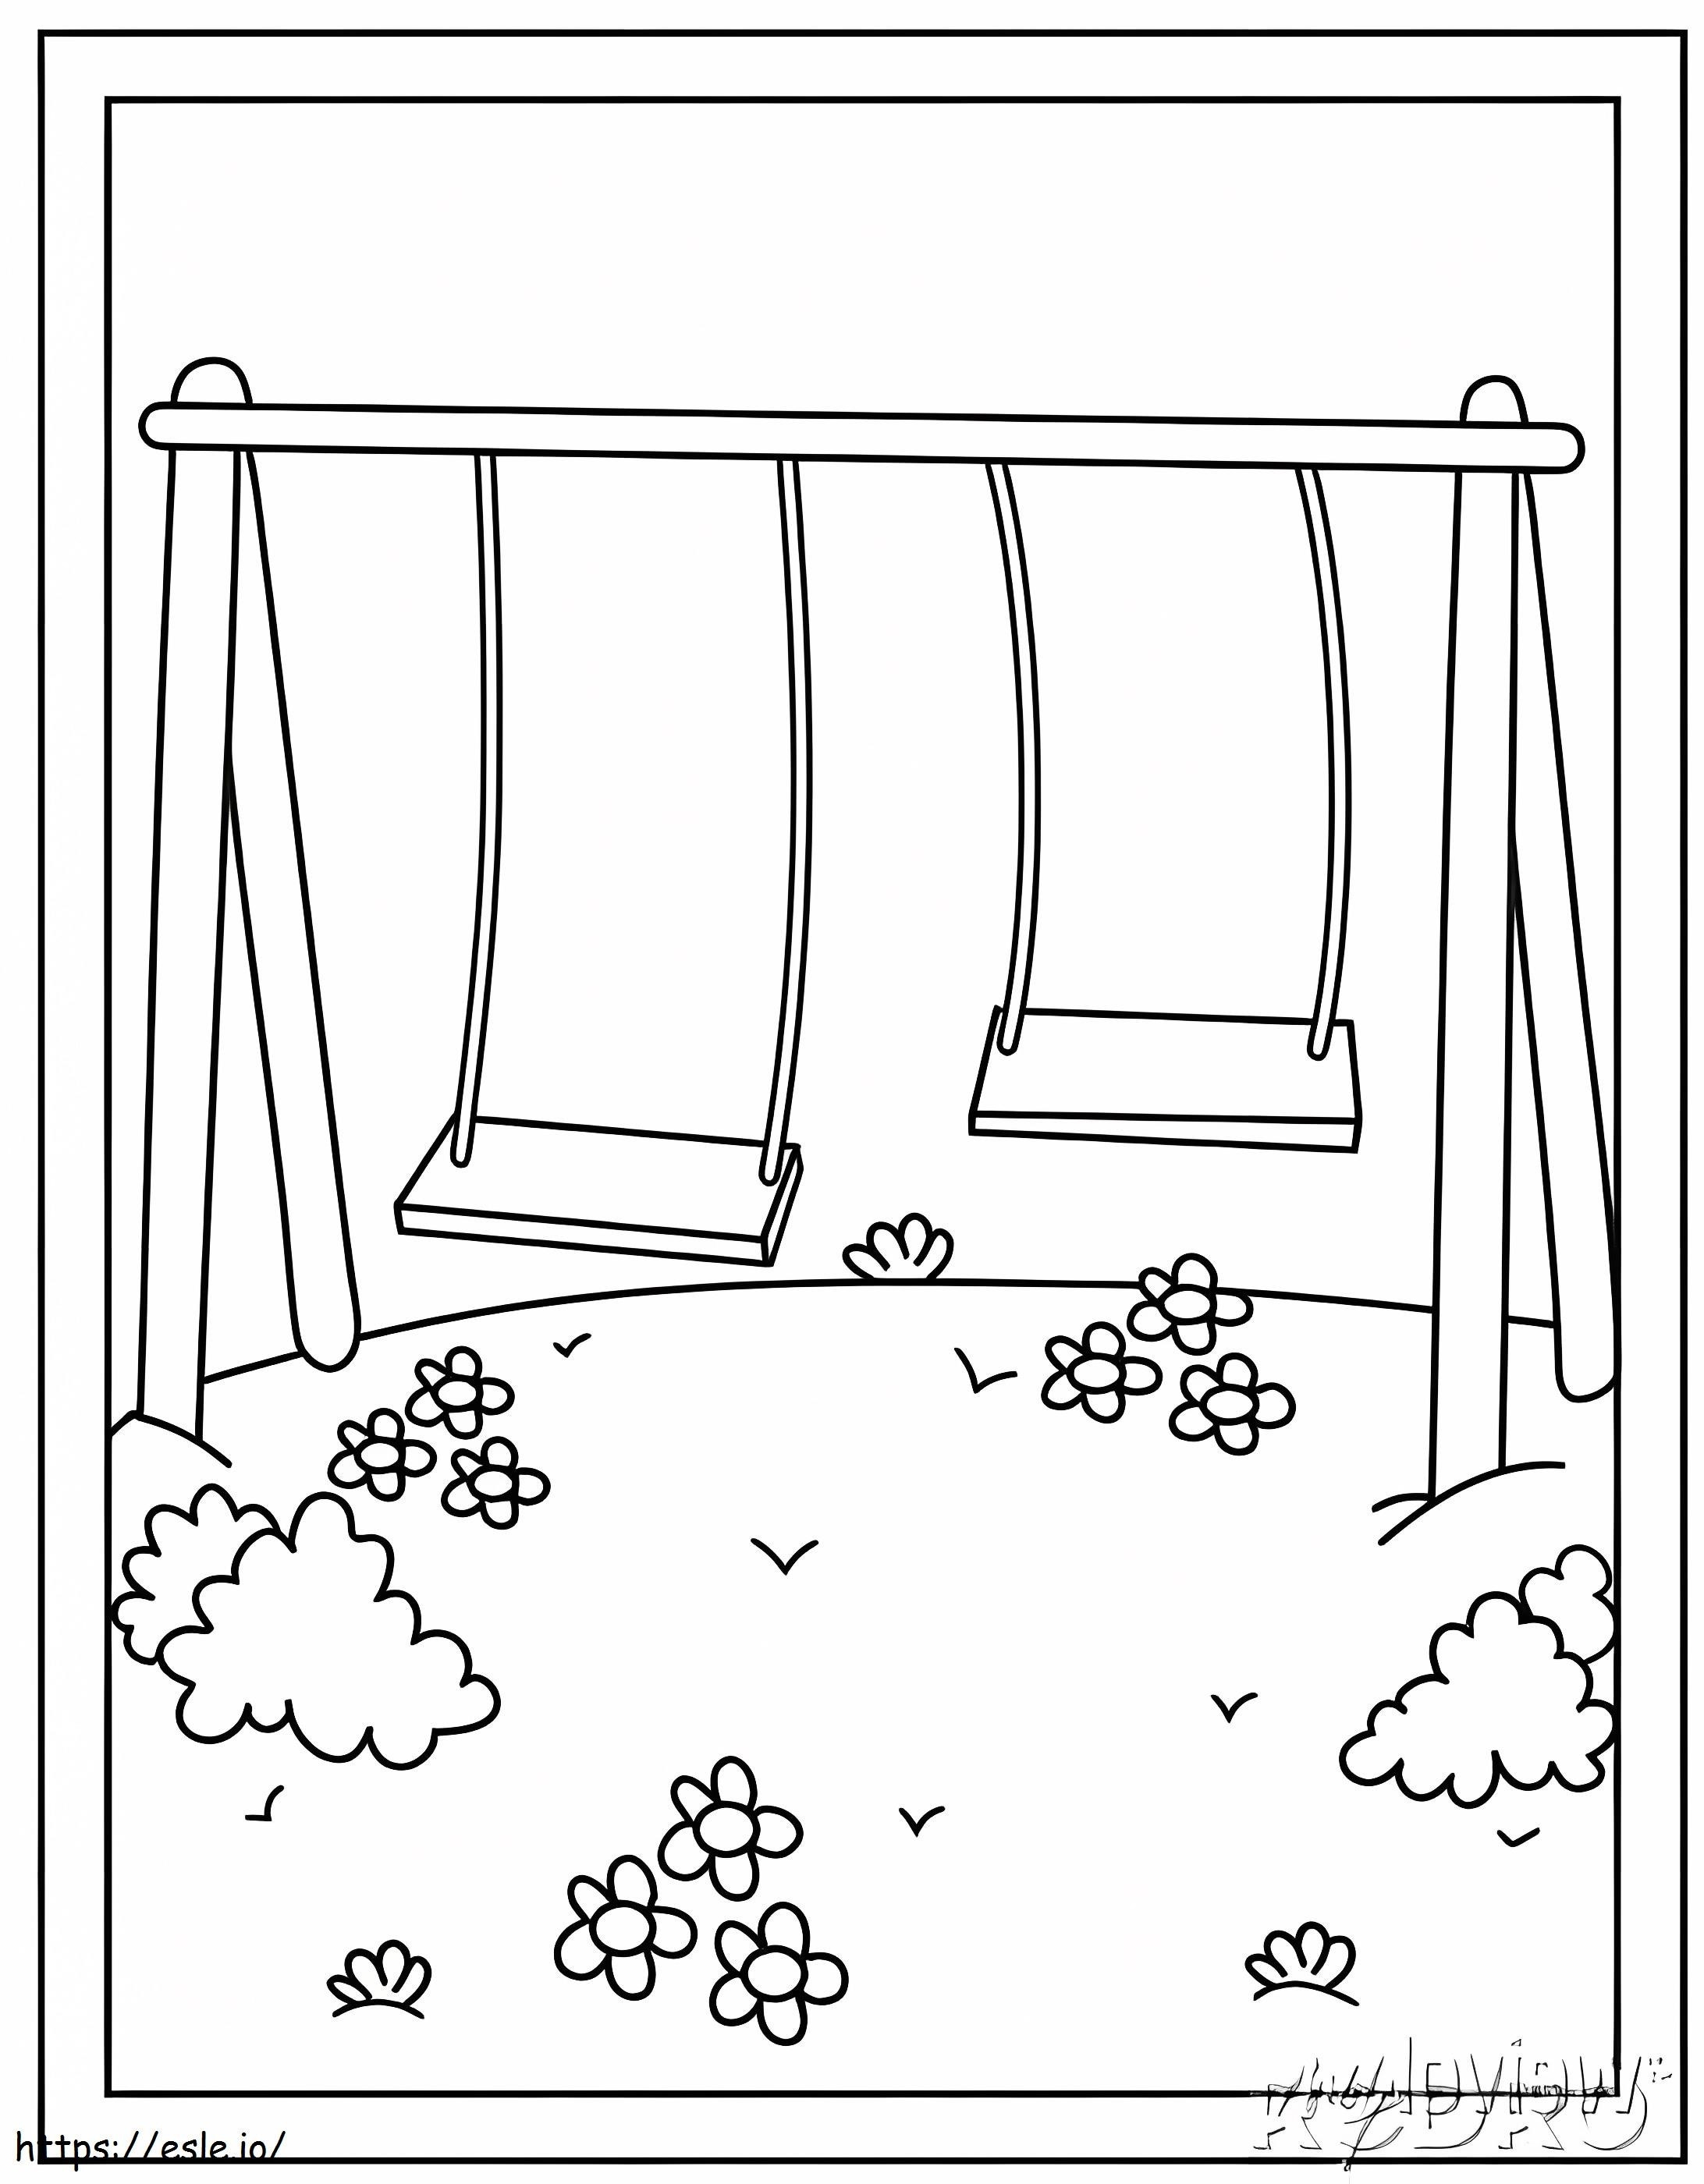 Printable Swing coloring page